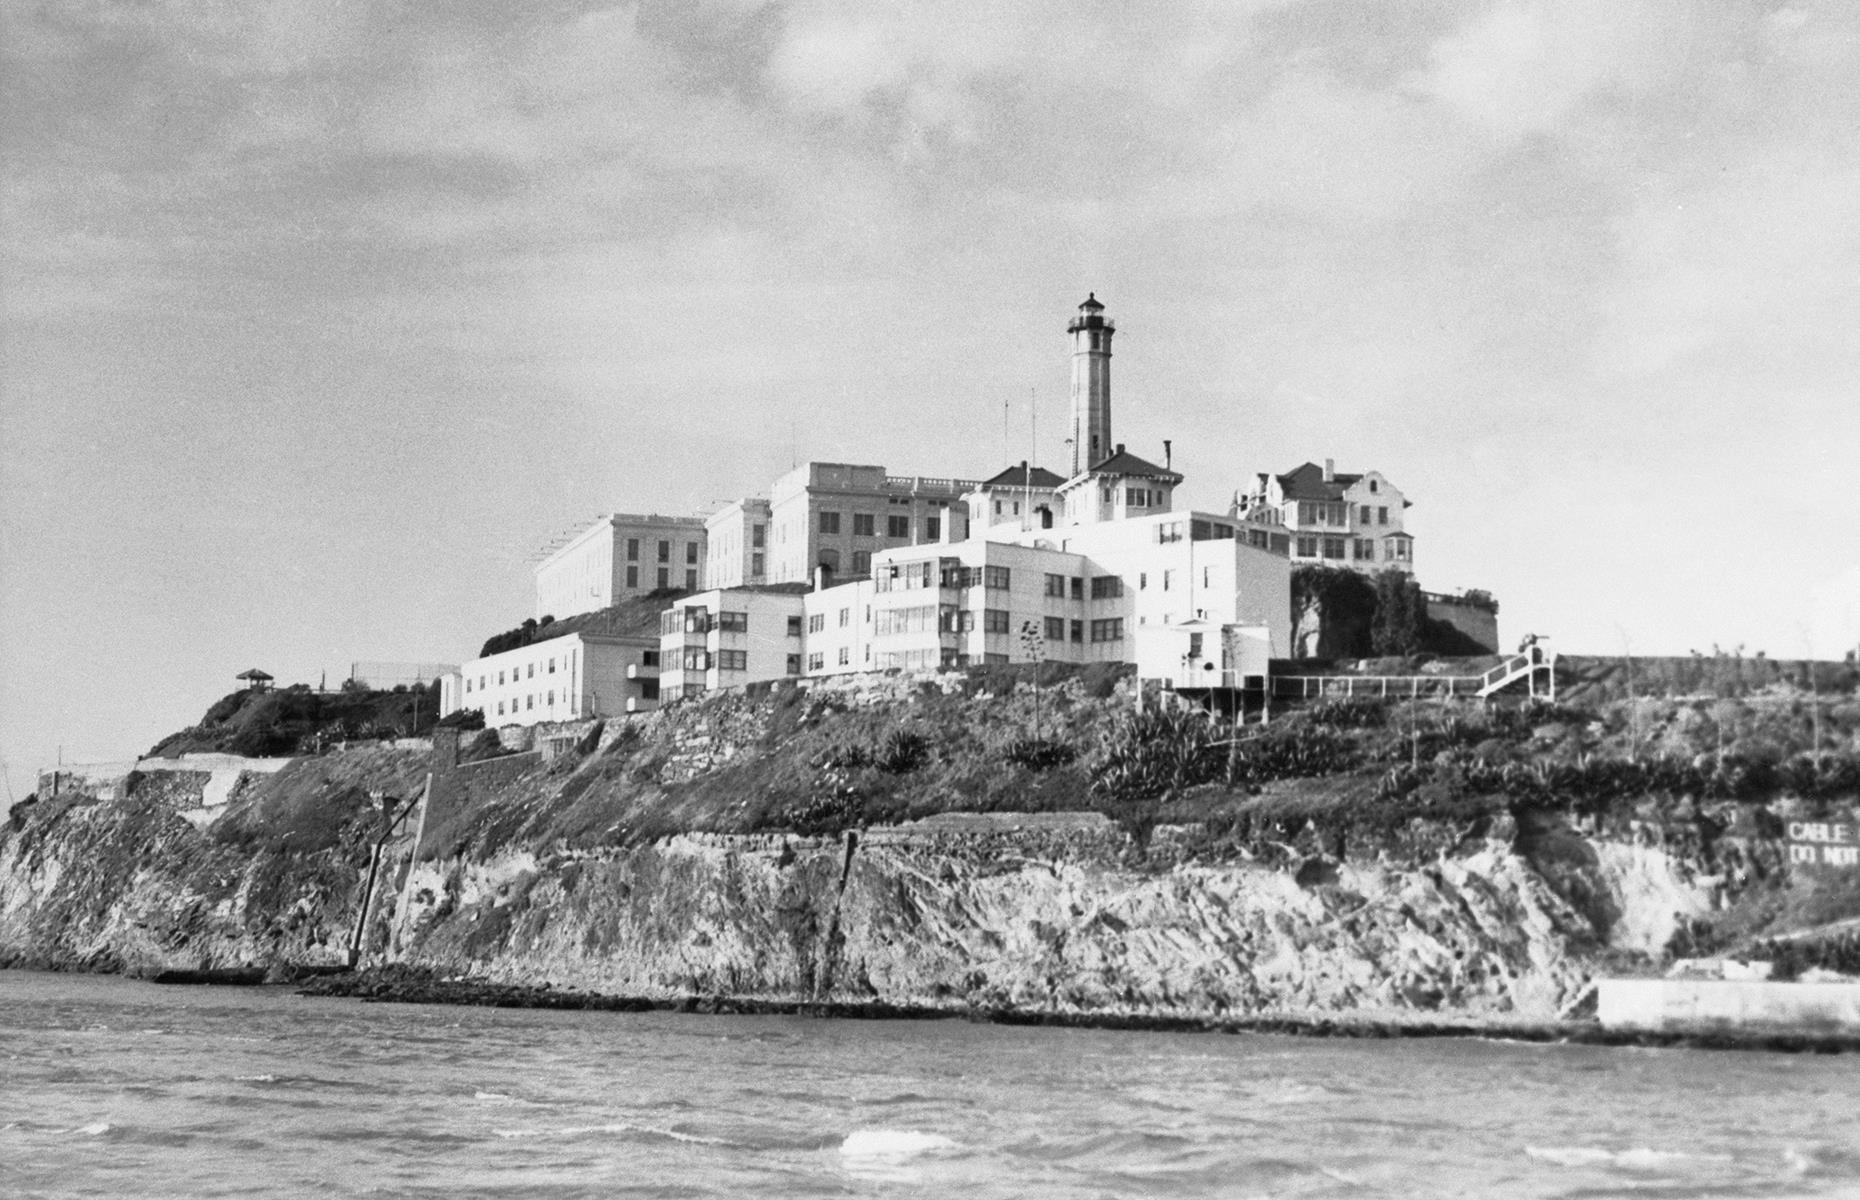 <p>As the decades pushed on, the fort's older weaponry – mounted cannons and antiquated rifles – became obsolete, and in 1907 Alcatraz was officially designated 'Pacific Branch, US Military Prison.' It was already a prison in all but name – the Spanish-American War in 1898 had seen its prison population expand from 25 to 461 – and was expanding rapidly. A giant new cellhouse with 600 individual cells, each with a toilet and electricity, was completed in 1912. At the time it was the largest reinforced concrete building in the world.</p>